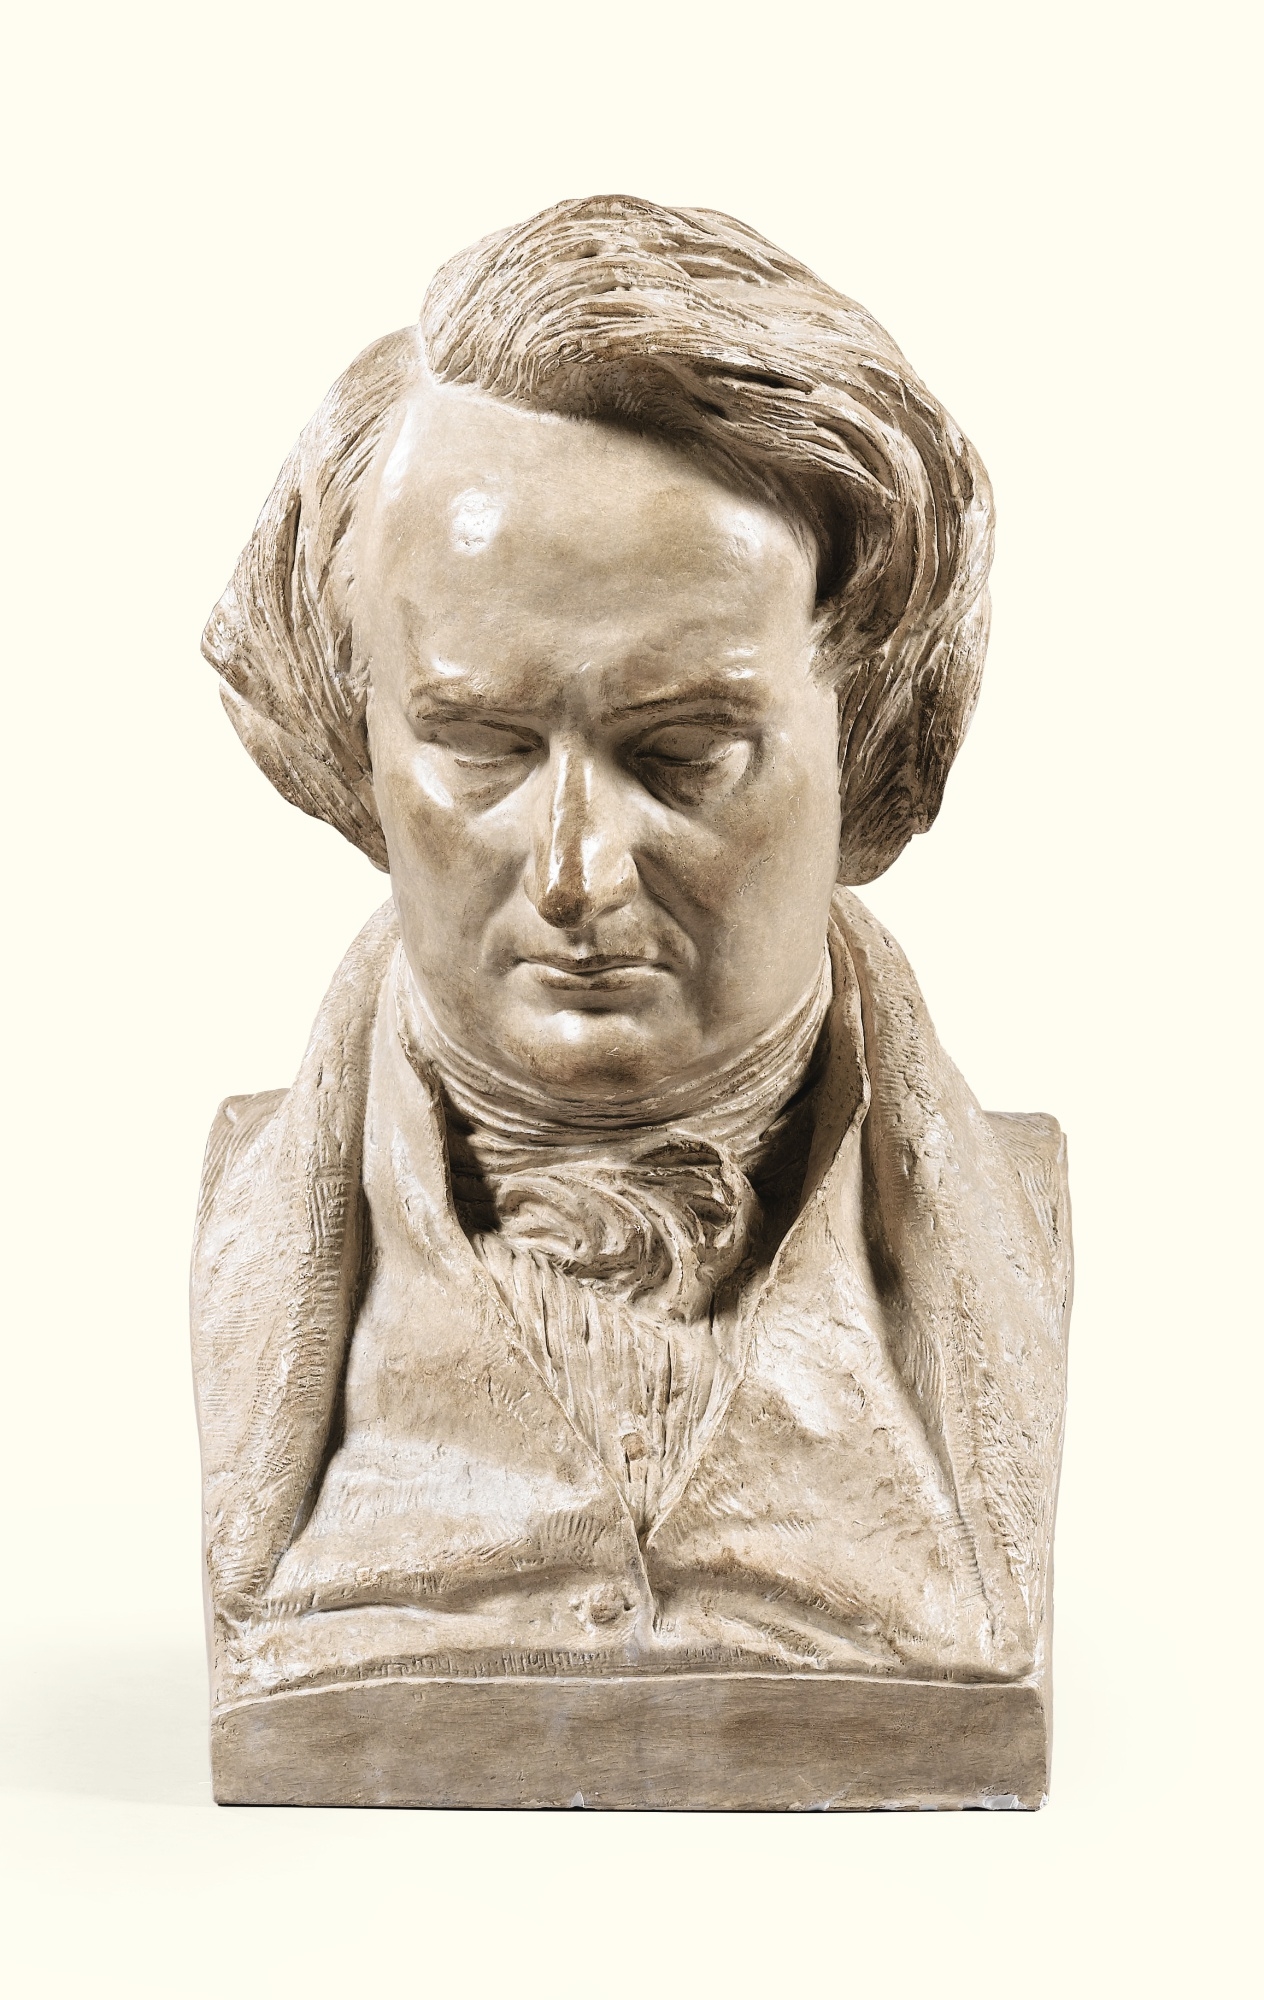 Artwork by Pierre Jean David d'Angers, After David d'Angers, ModernBust of Victor Hugo